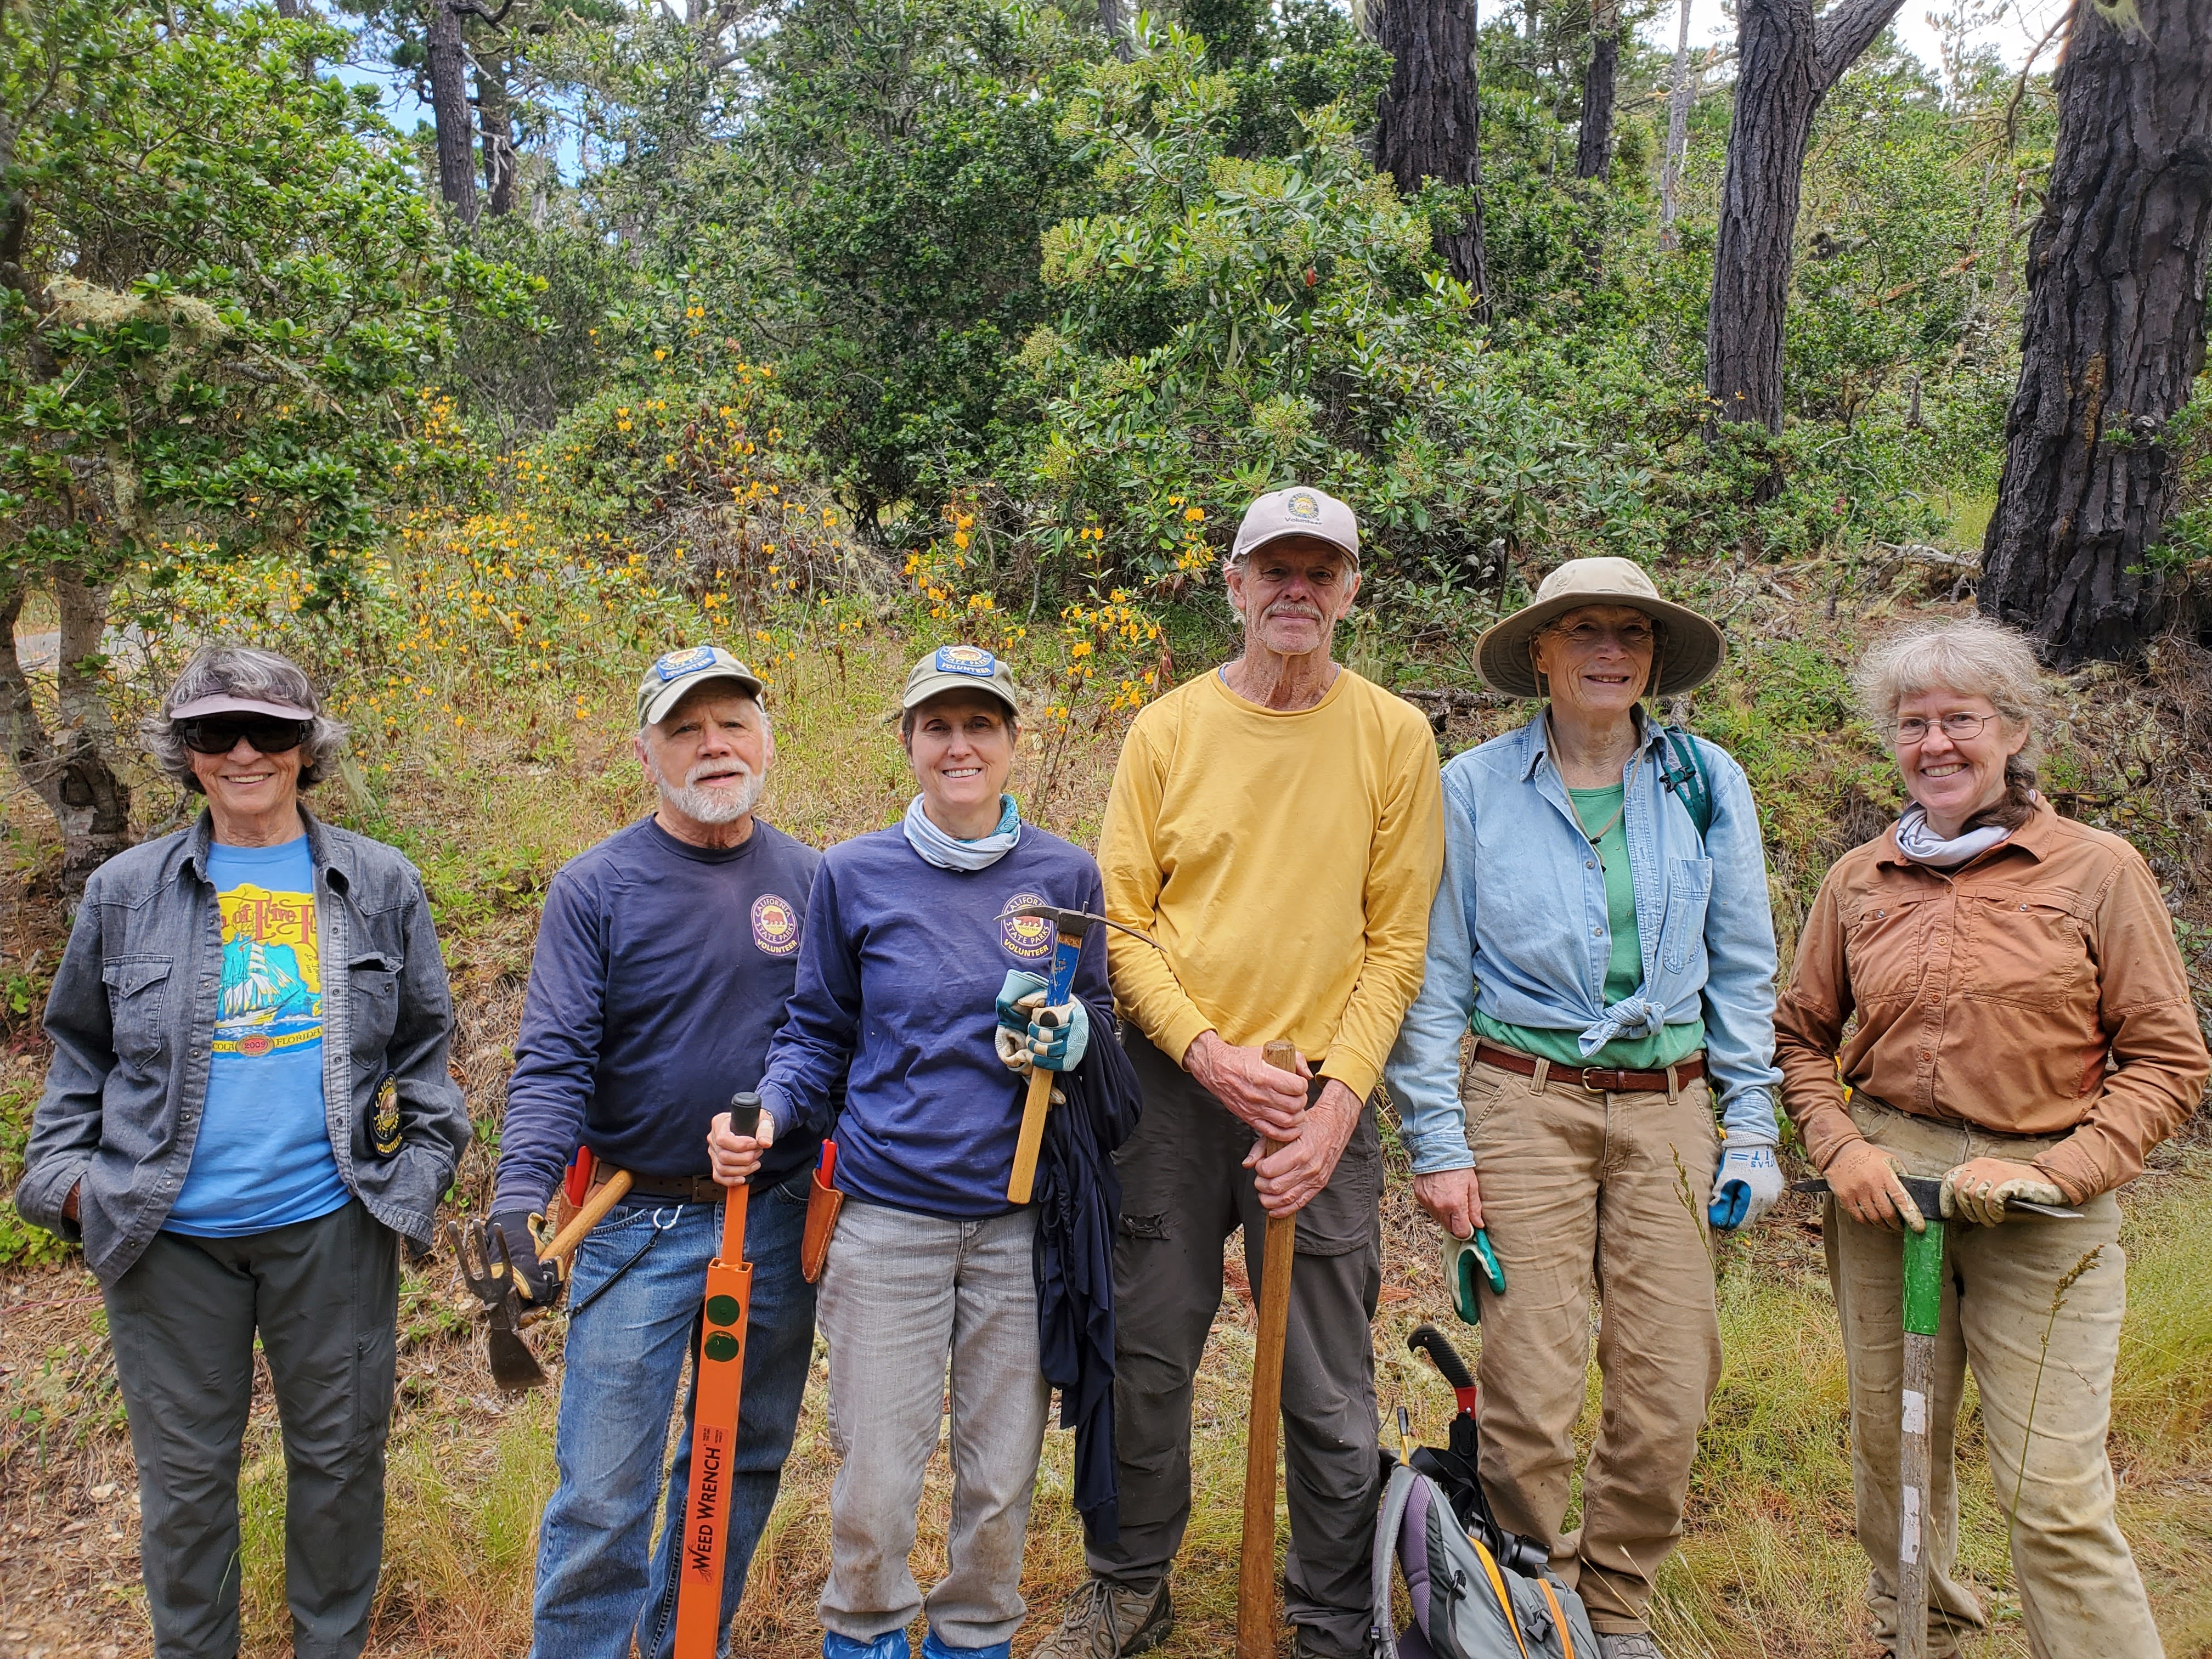 Volunteers pose in the pine forest after a morning removing invasive French Broom at Ishxenta State Park.